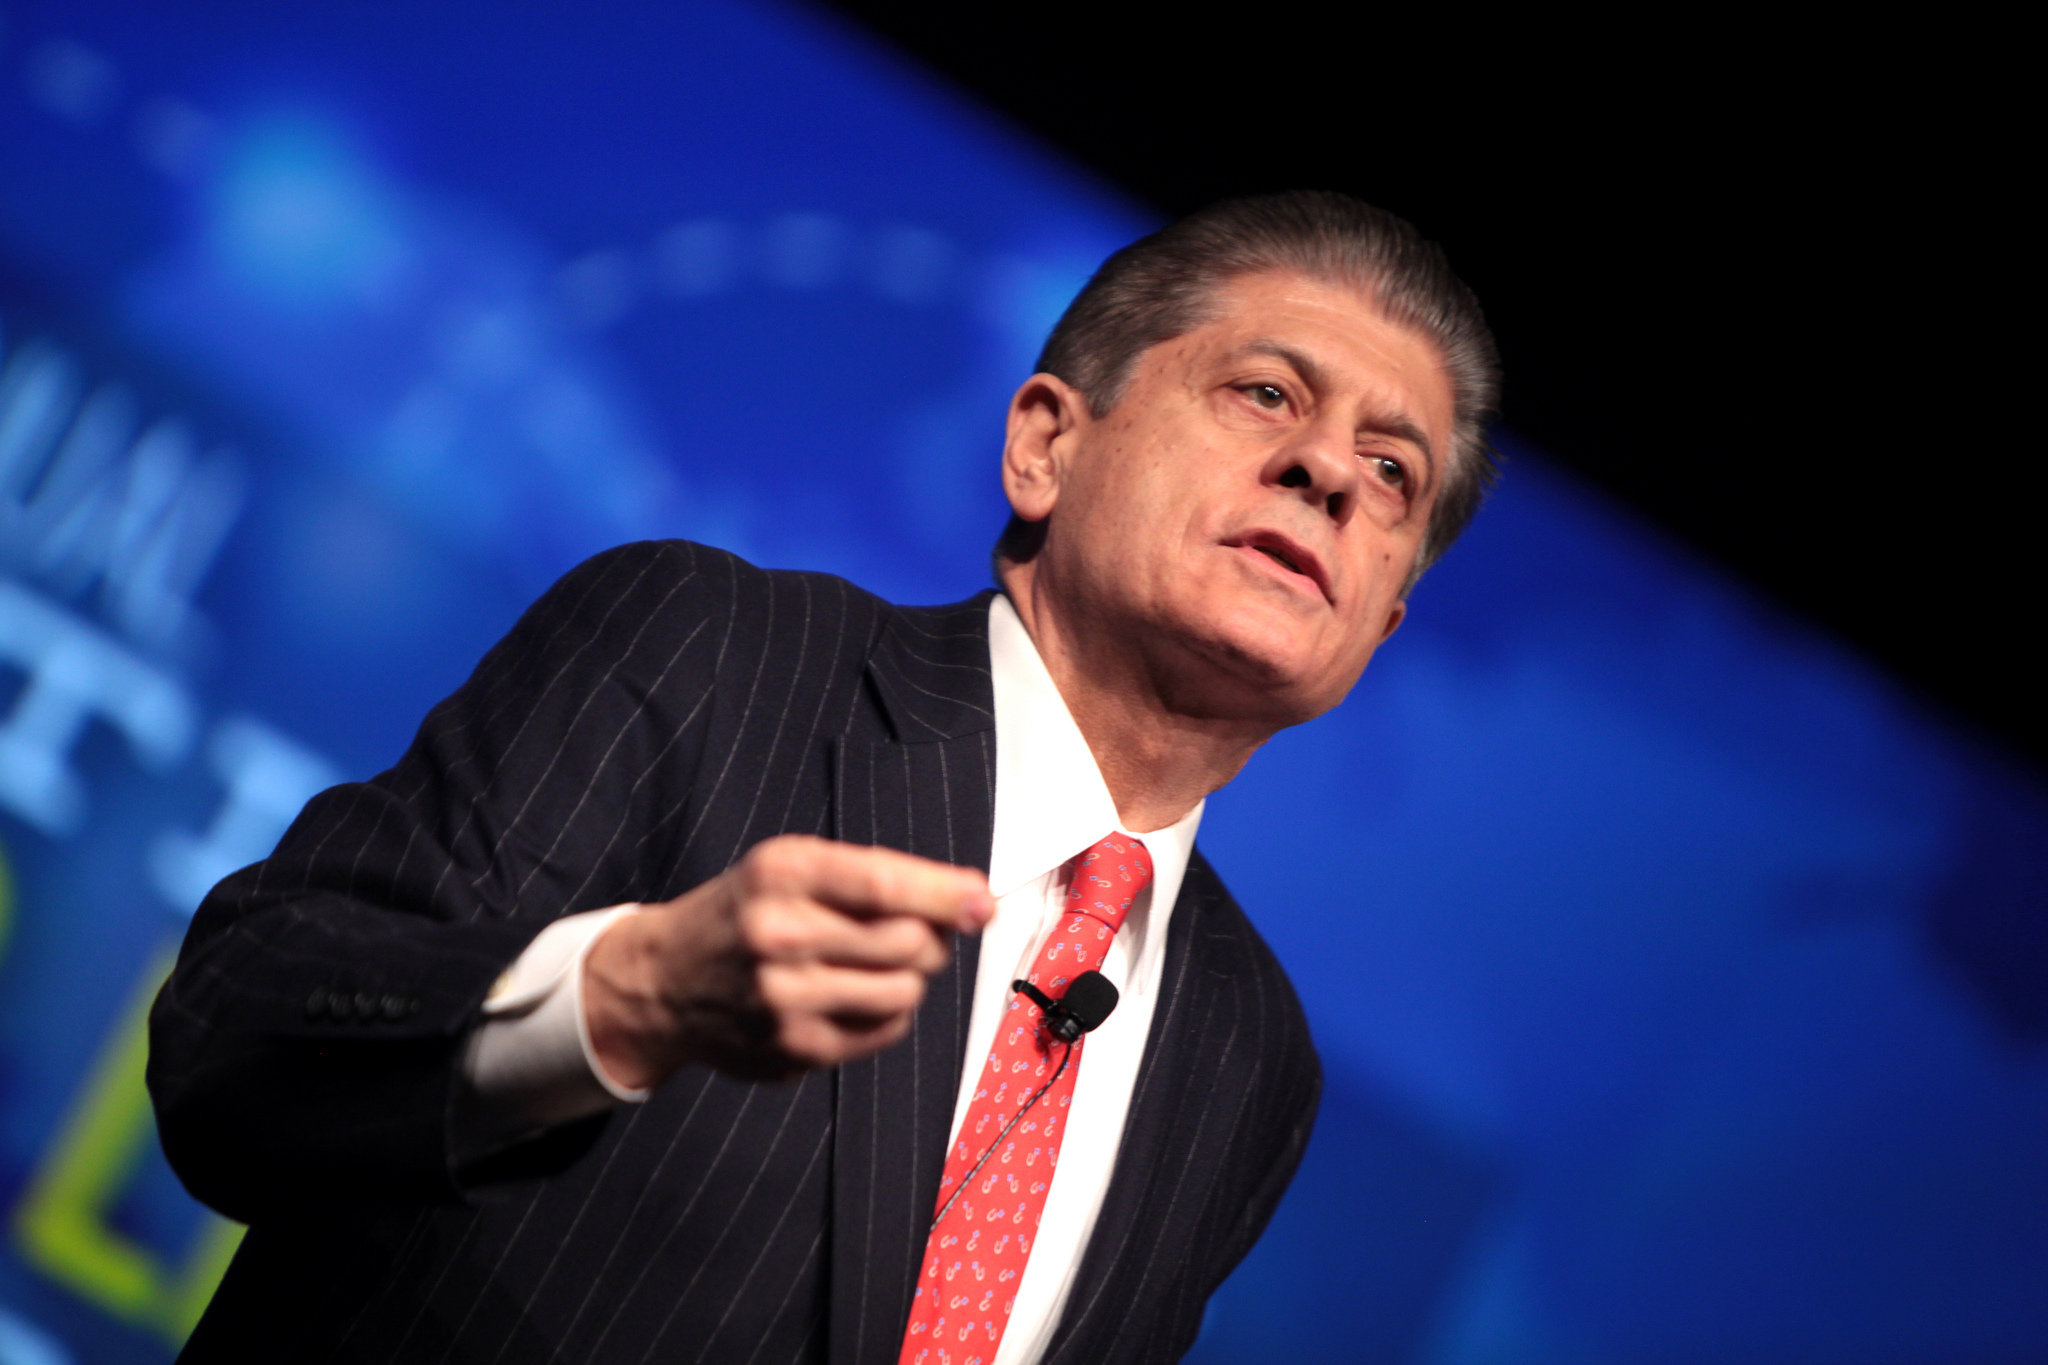 Image: Judge Napolitano Drops A Bomb: US Intelligence Was Behind Hacks — Not Russia (Video)